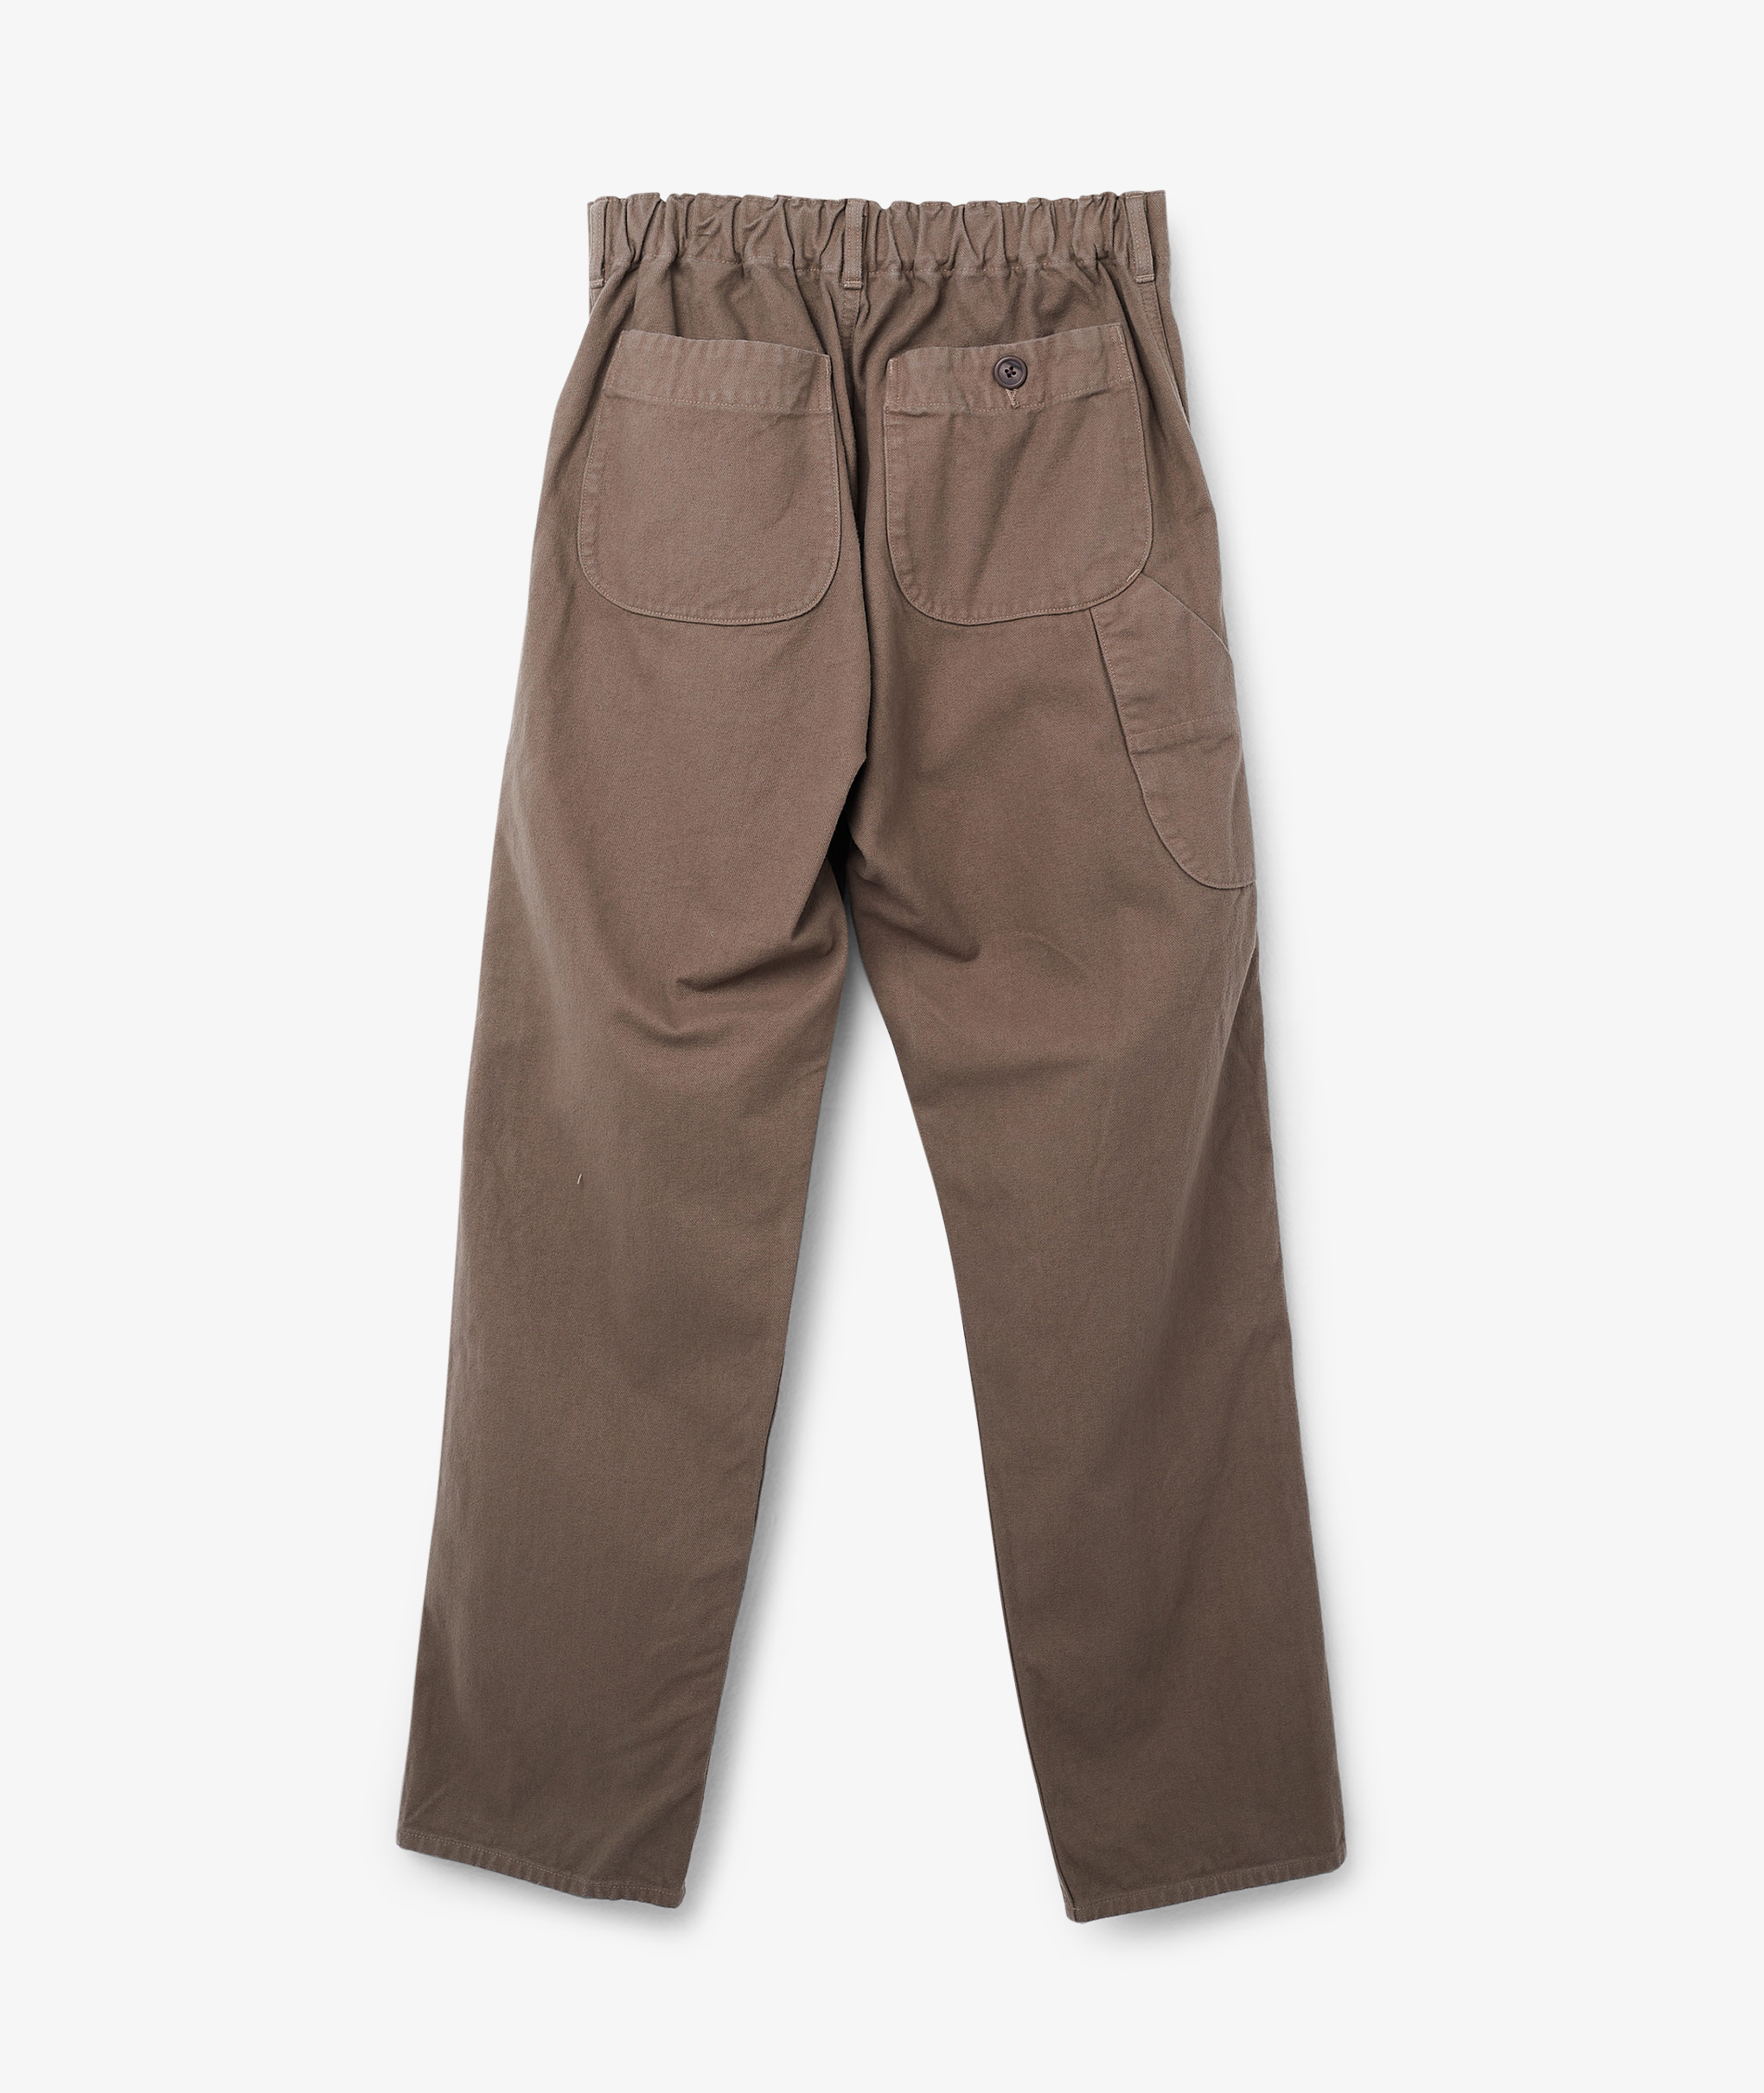 Norse Store | Shipping Worldwide - orSlow French Work Pants - Rose